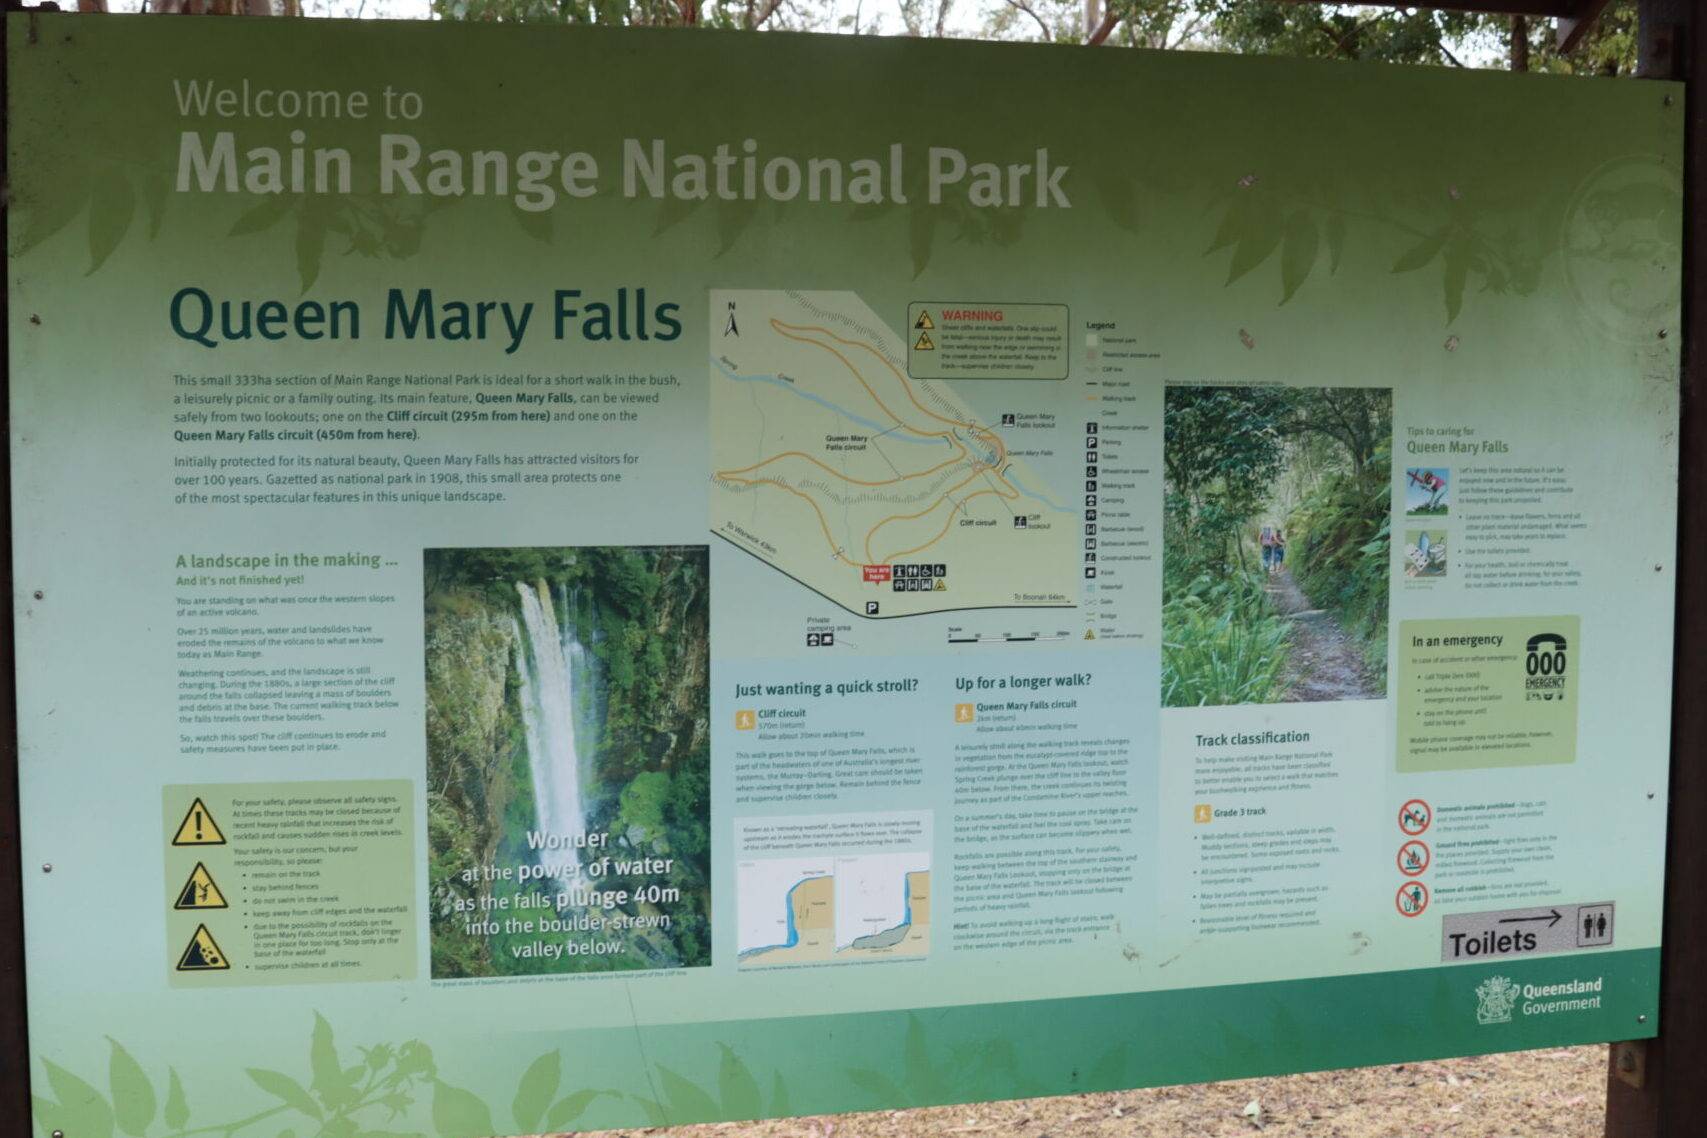 The five waterfalls surrounding Killarney make this area a popular scenic destination, the Teviot Falls, Queens Mary Falls. Dagg's Falls, Browns Falls and Upper Brown's Falls